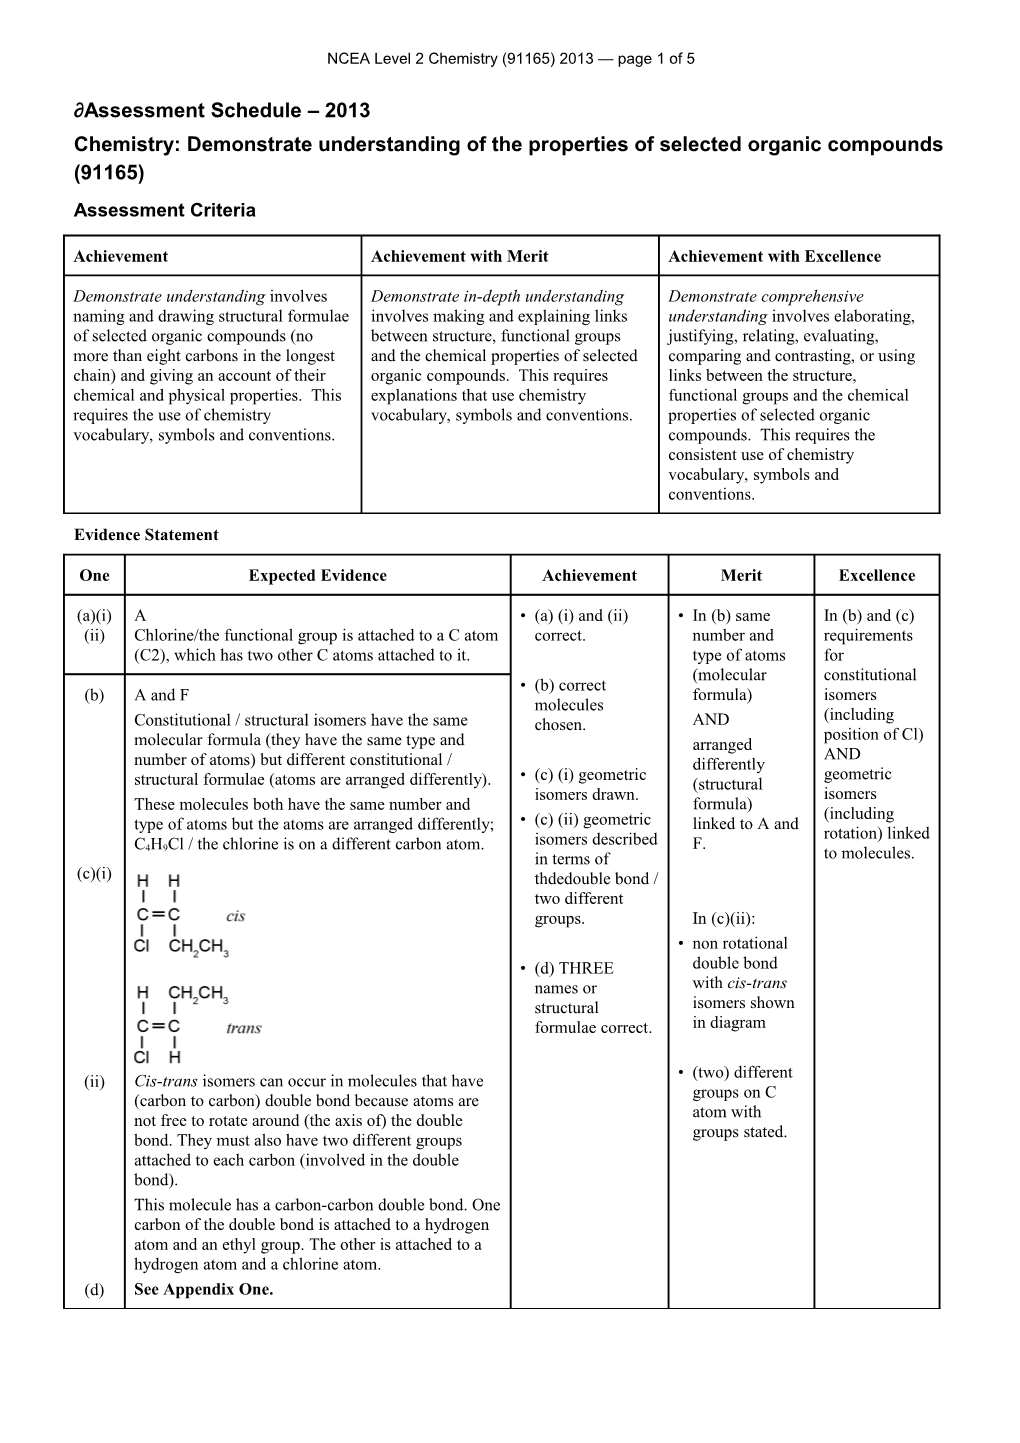 NCEA Level 2 Chemistry (91165) 2013 Assessment Schedule